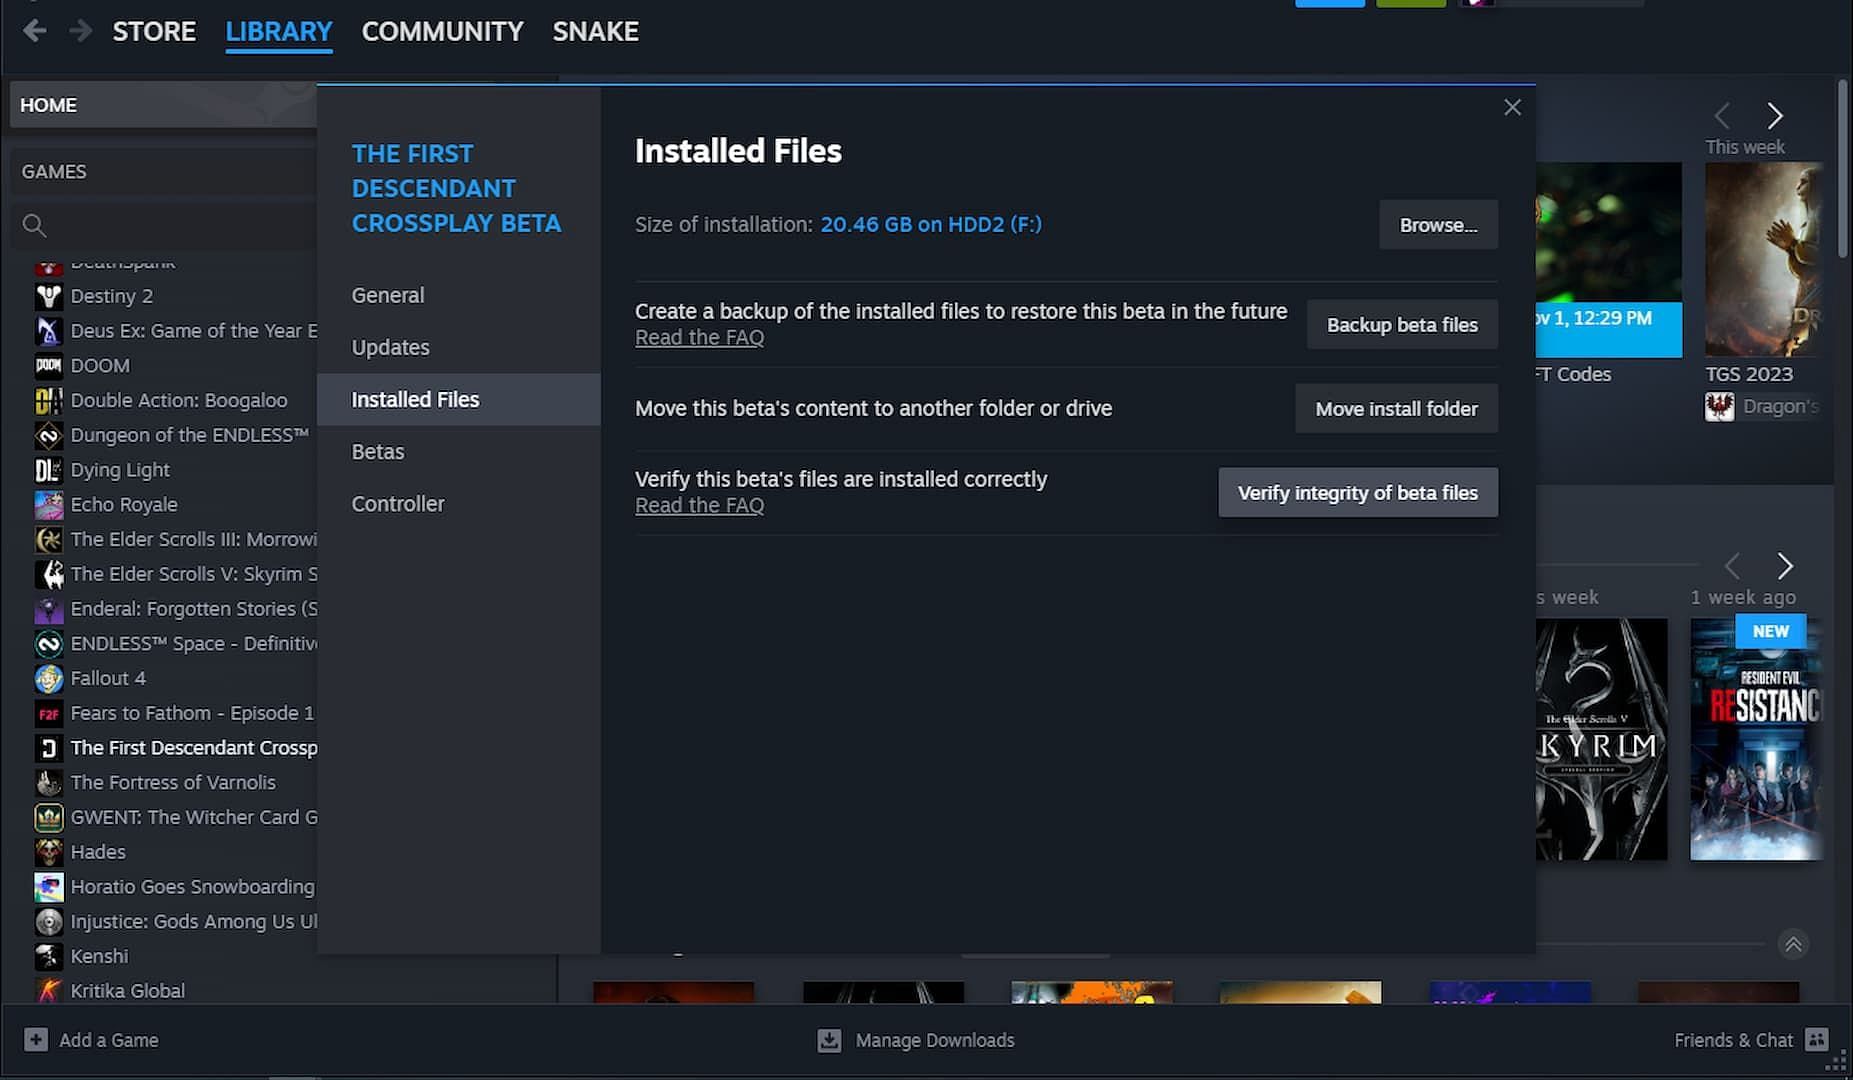 How to verify files on Steam for The First Descendant (Image via Nexon)